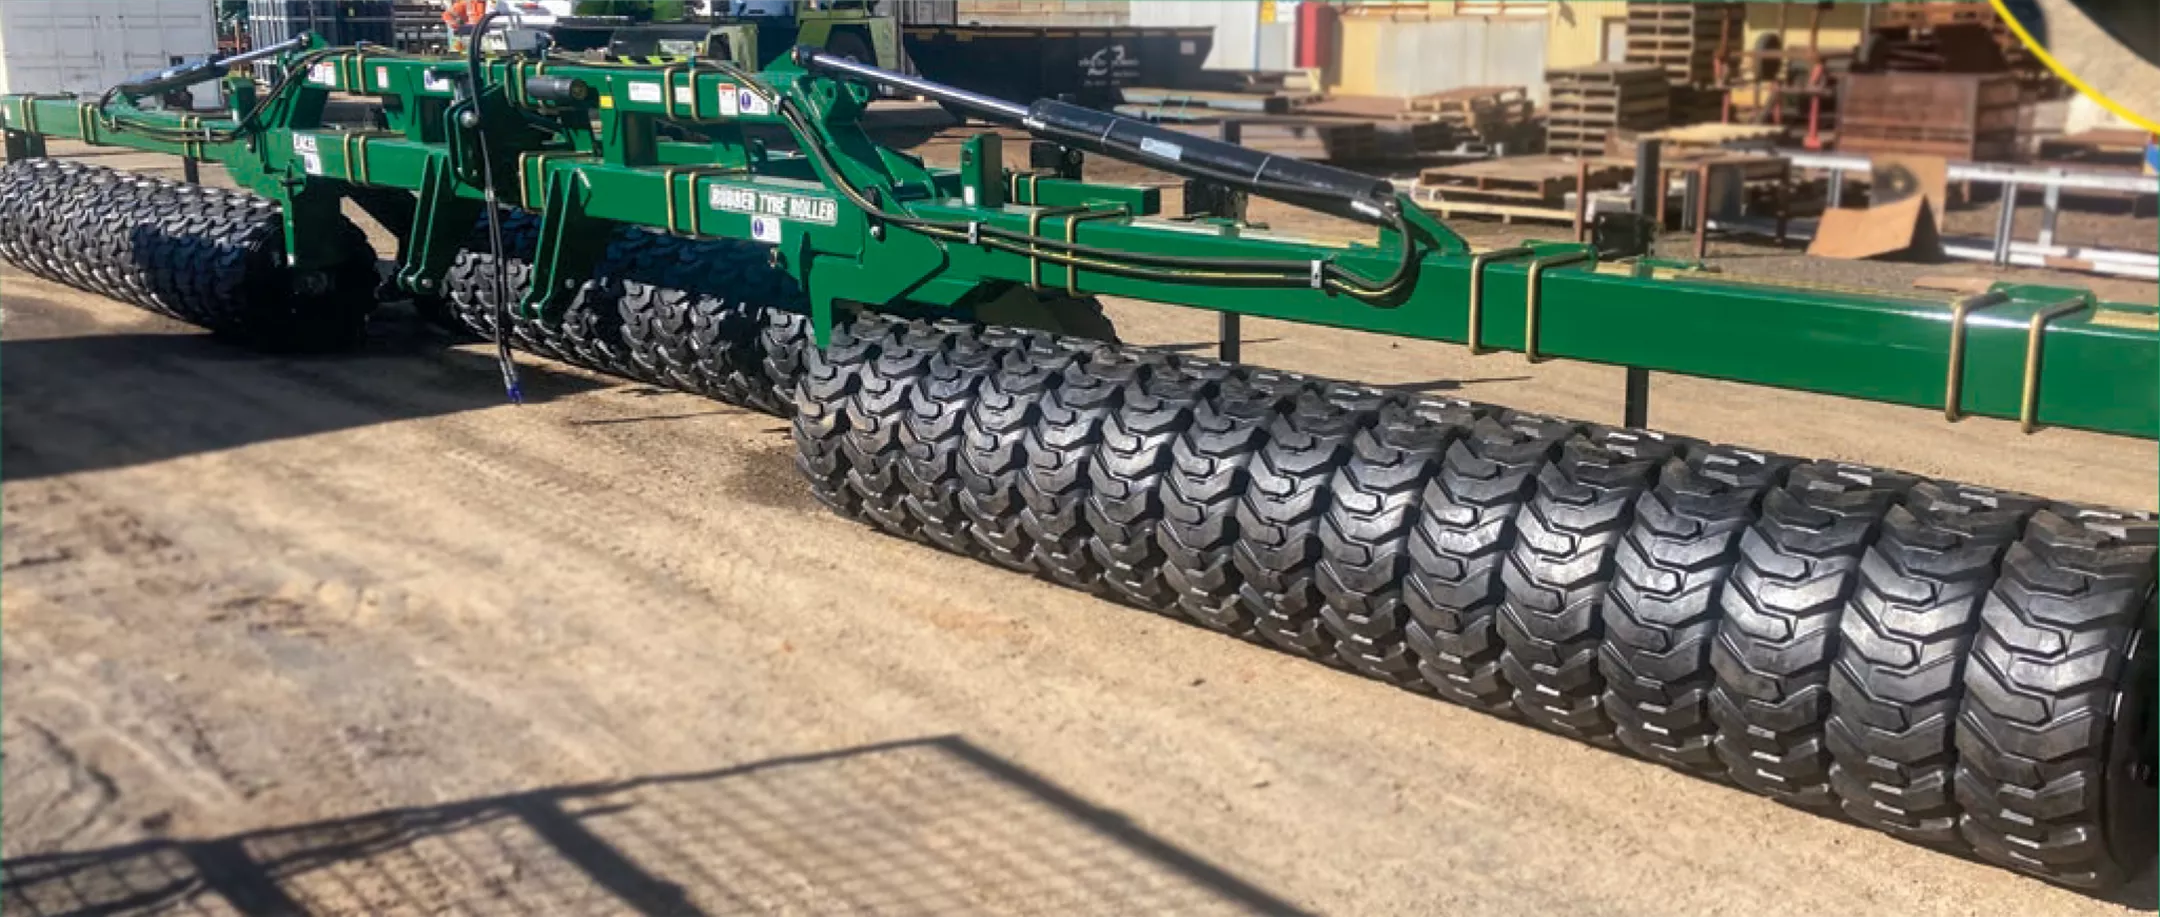 Australian made agricultural rubber tyre roller/compactor